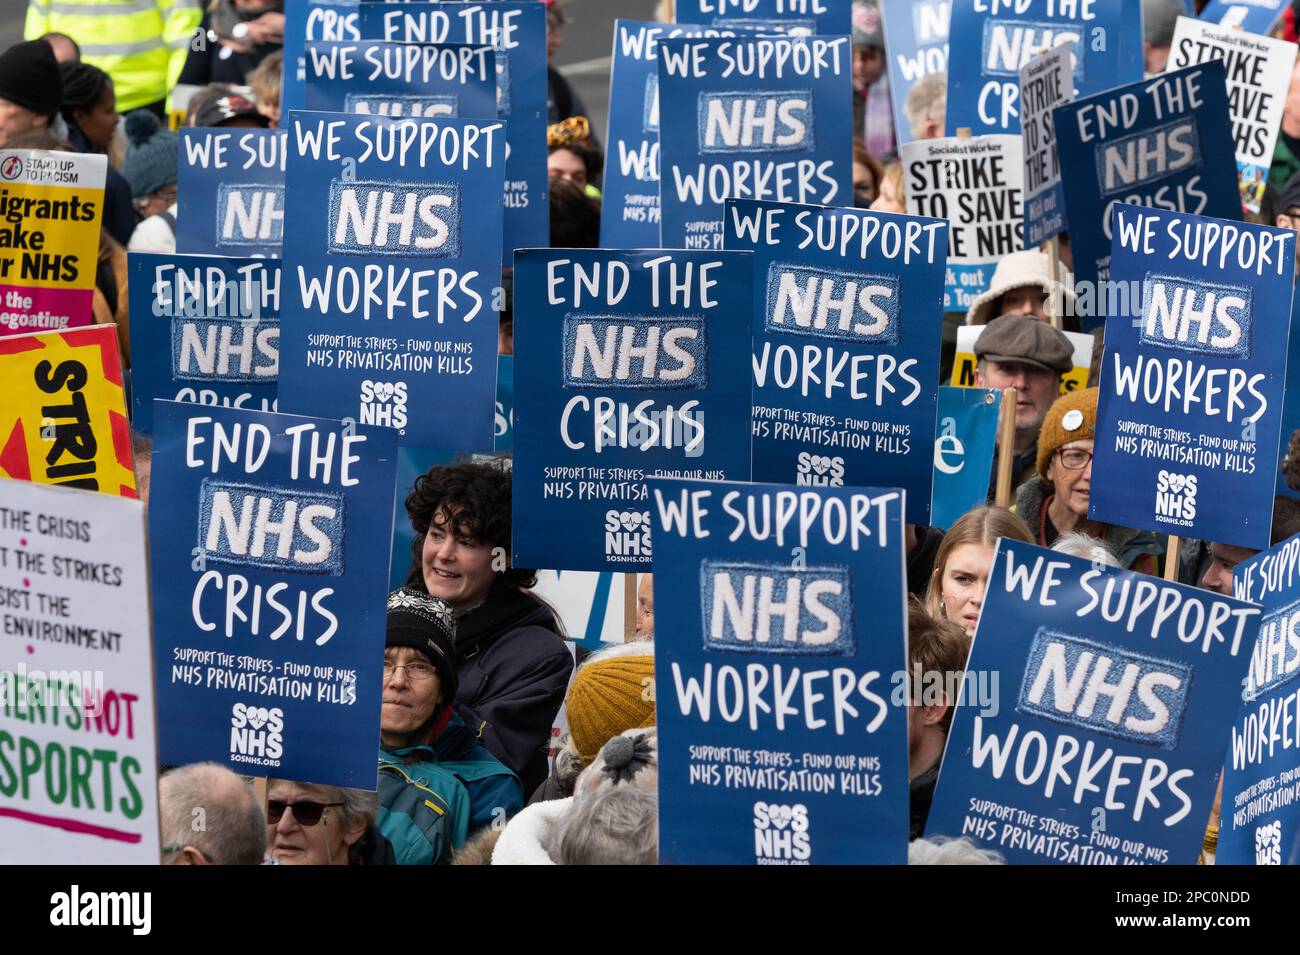 London, UK. 11 March, 2023. National Health Service (NHS) staff and supporters march through Central London demanding better pay and conditions and an Stock Photo